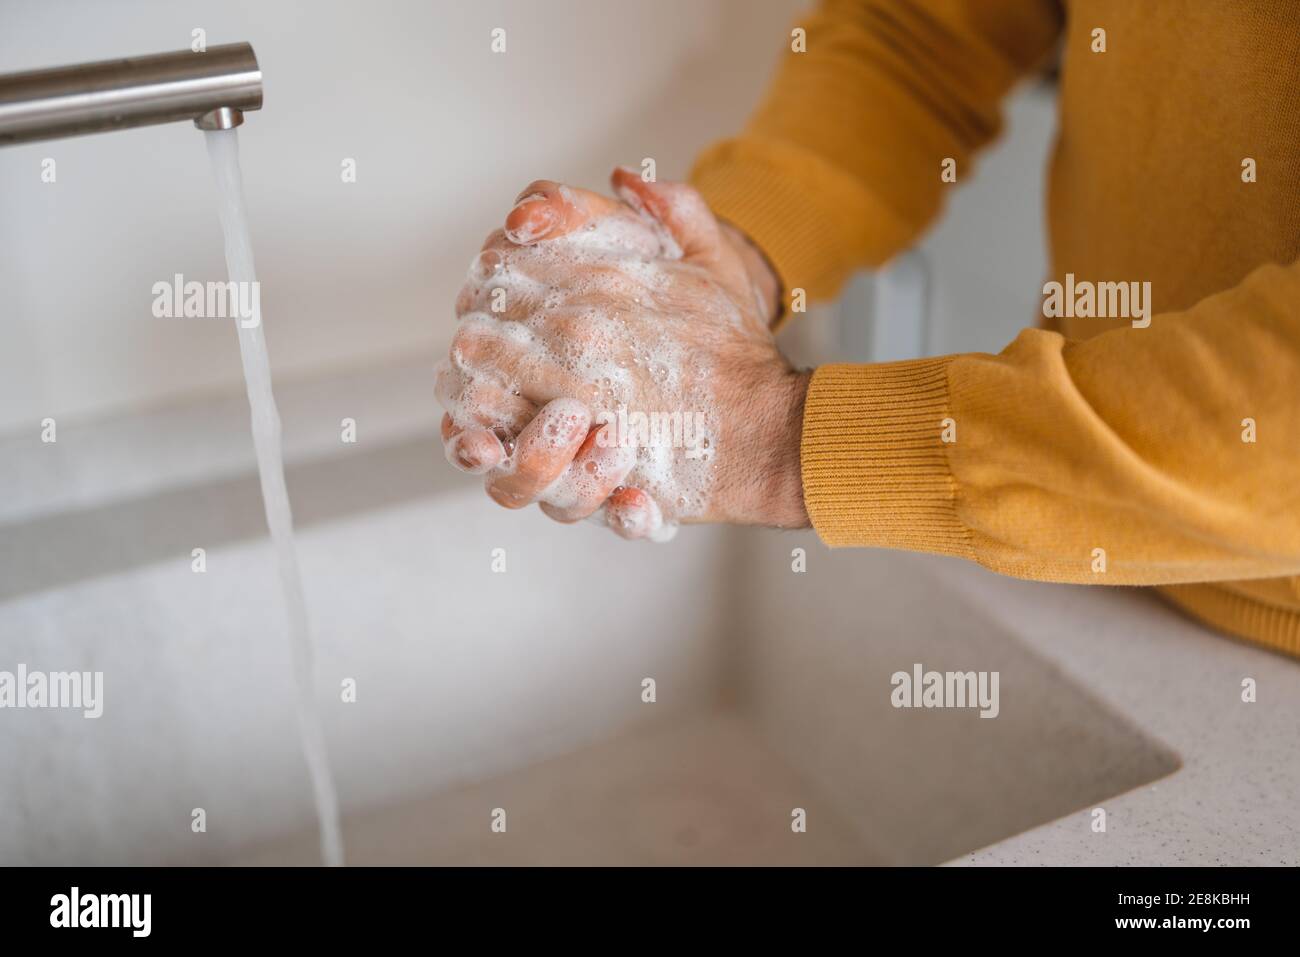 Washing hands with antibacterial gel man for corona virus prevention, hygiene Stock Photo